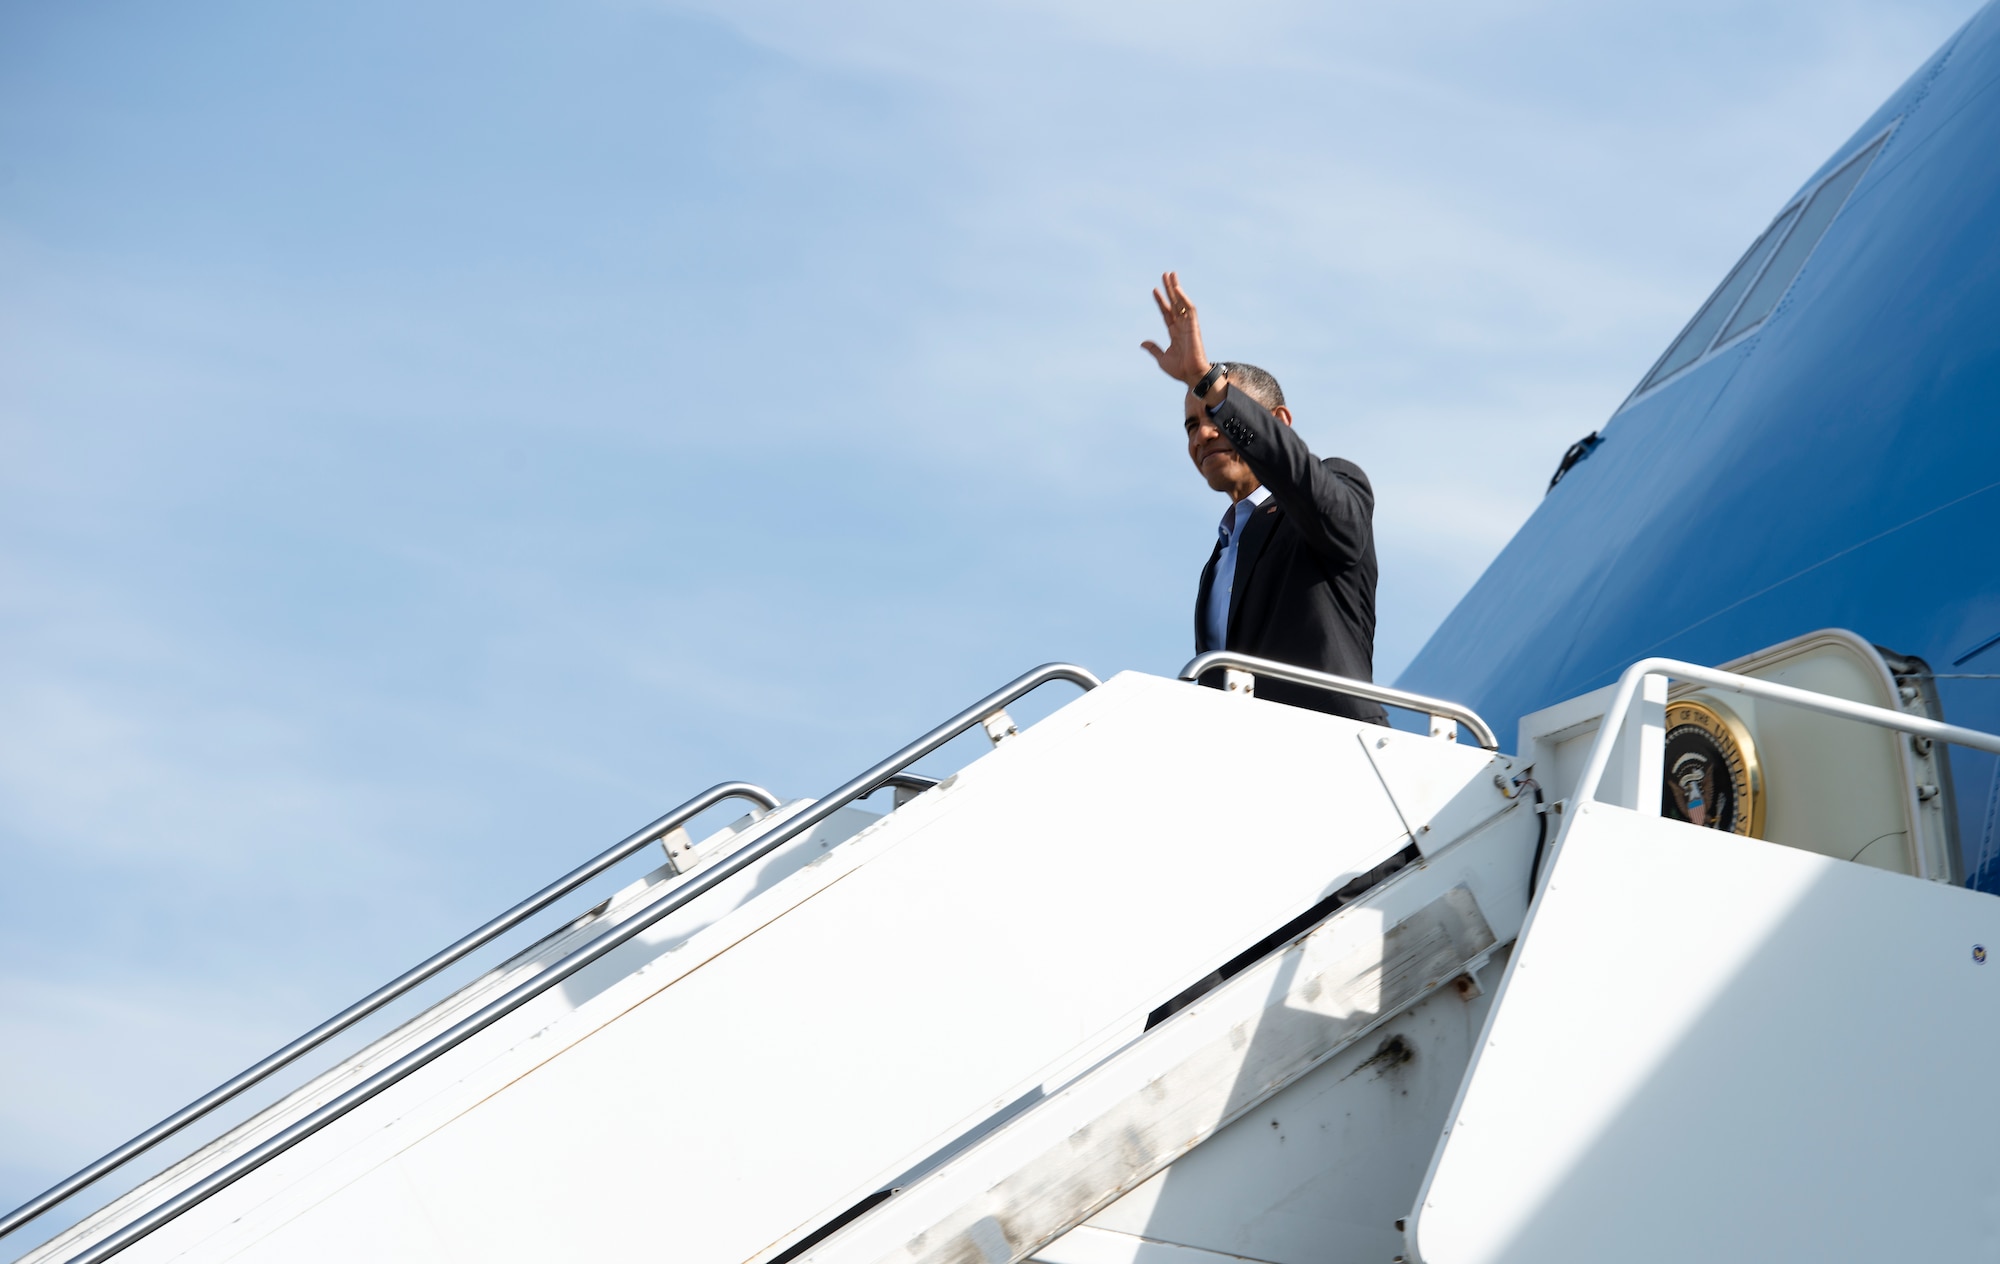 President Barack Obama waves hello as he exits Air Force One, March 29, 2014, at Ramstein Air Base, Germany. During his stop, Obama visited wounded warriors from Landstuhl Regional Medical Center. (U.S. Air Force photo/Senior Airman Damon Kasberg)